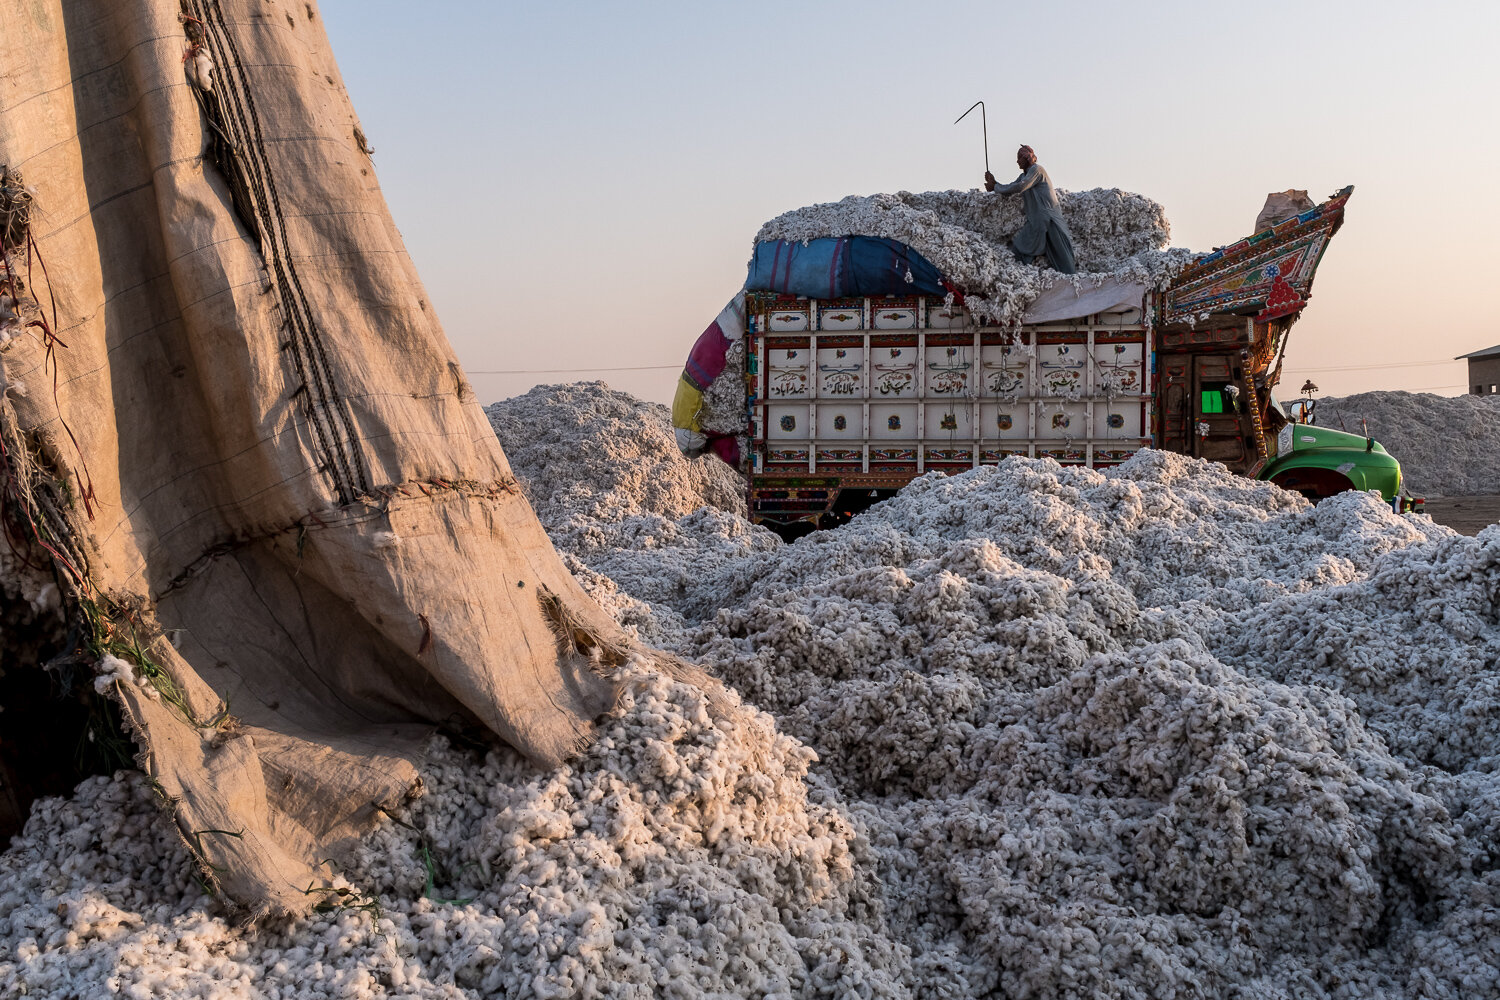  A truck delivering recently-picked cotton is unloaded at Usman Marvandi Cotton Industries on Tuesday, November 28, 2017 in Bubak, Sindh, Pakistan. Cotton is a very water-intensive crop to grow, but it is a major agricultural commodity for Pakistan; 